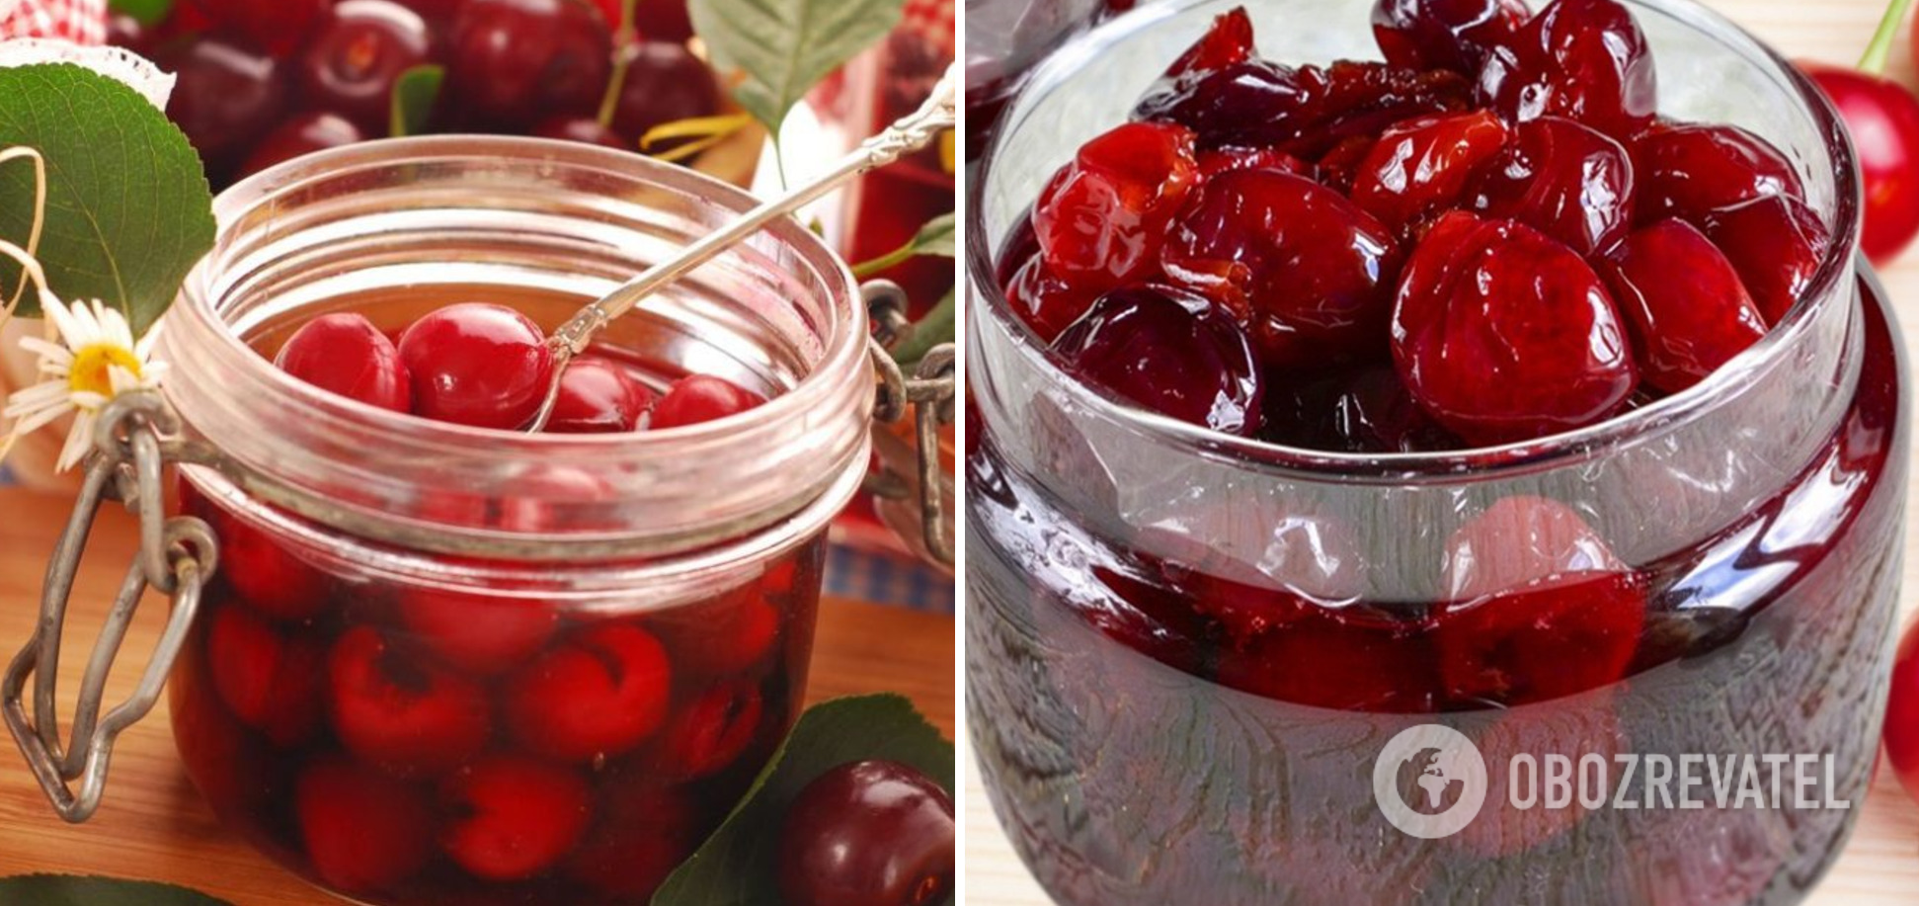 Recipe for cherries in their own juice